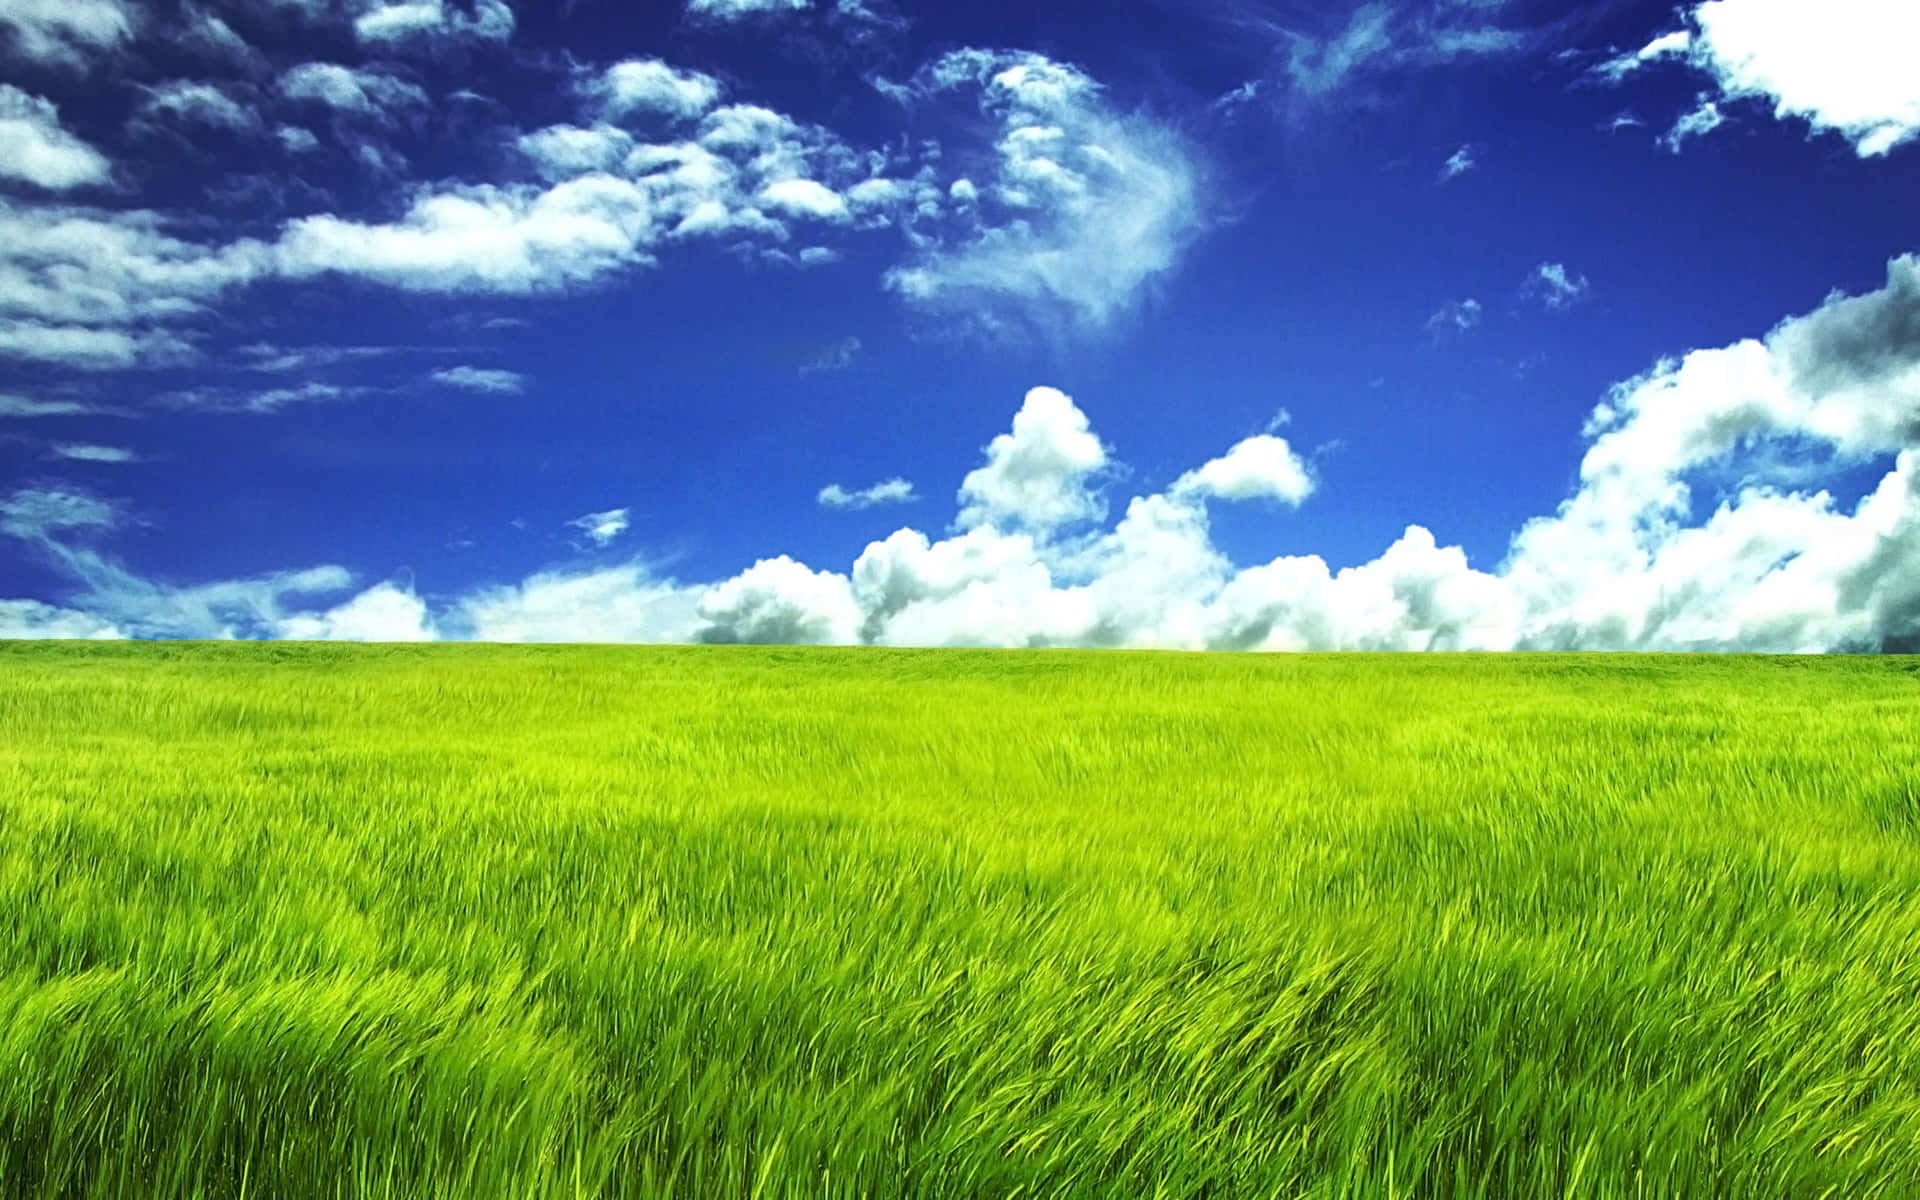 Take in the lush, green grass with this vibrant background!